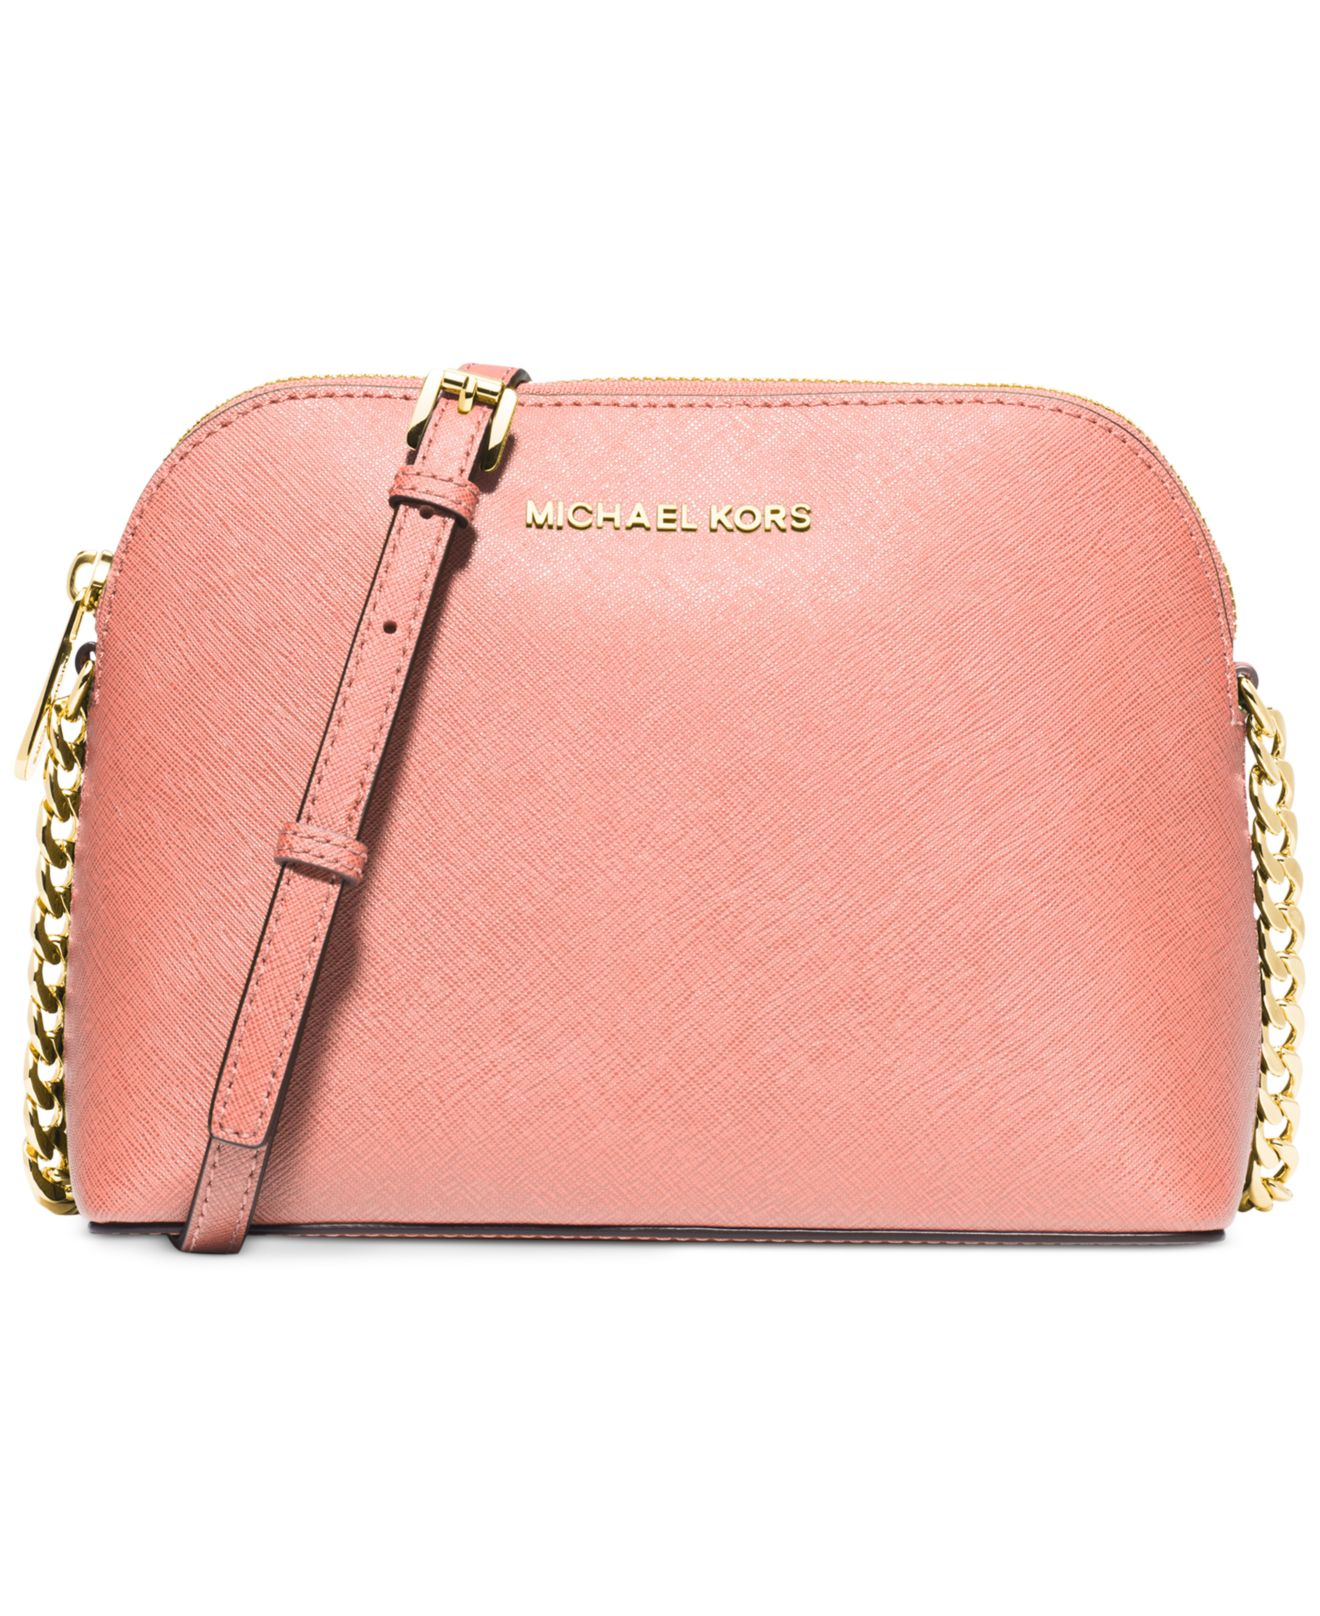 Lyst - Michael Kors Michael Cindy Large Dome Crossbody in Pink